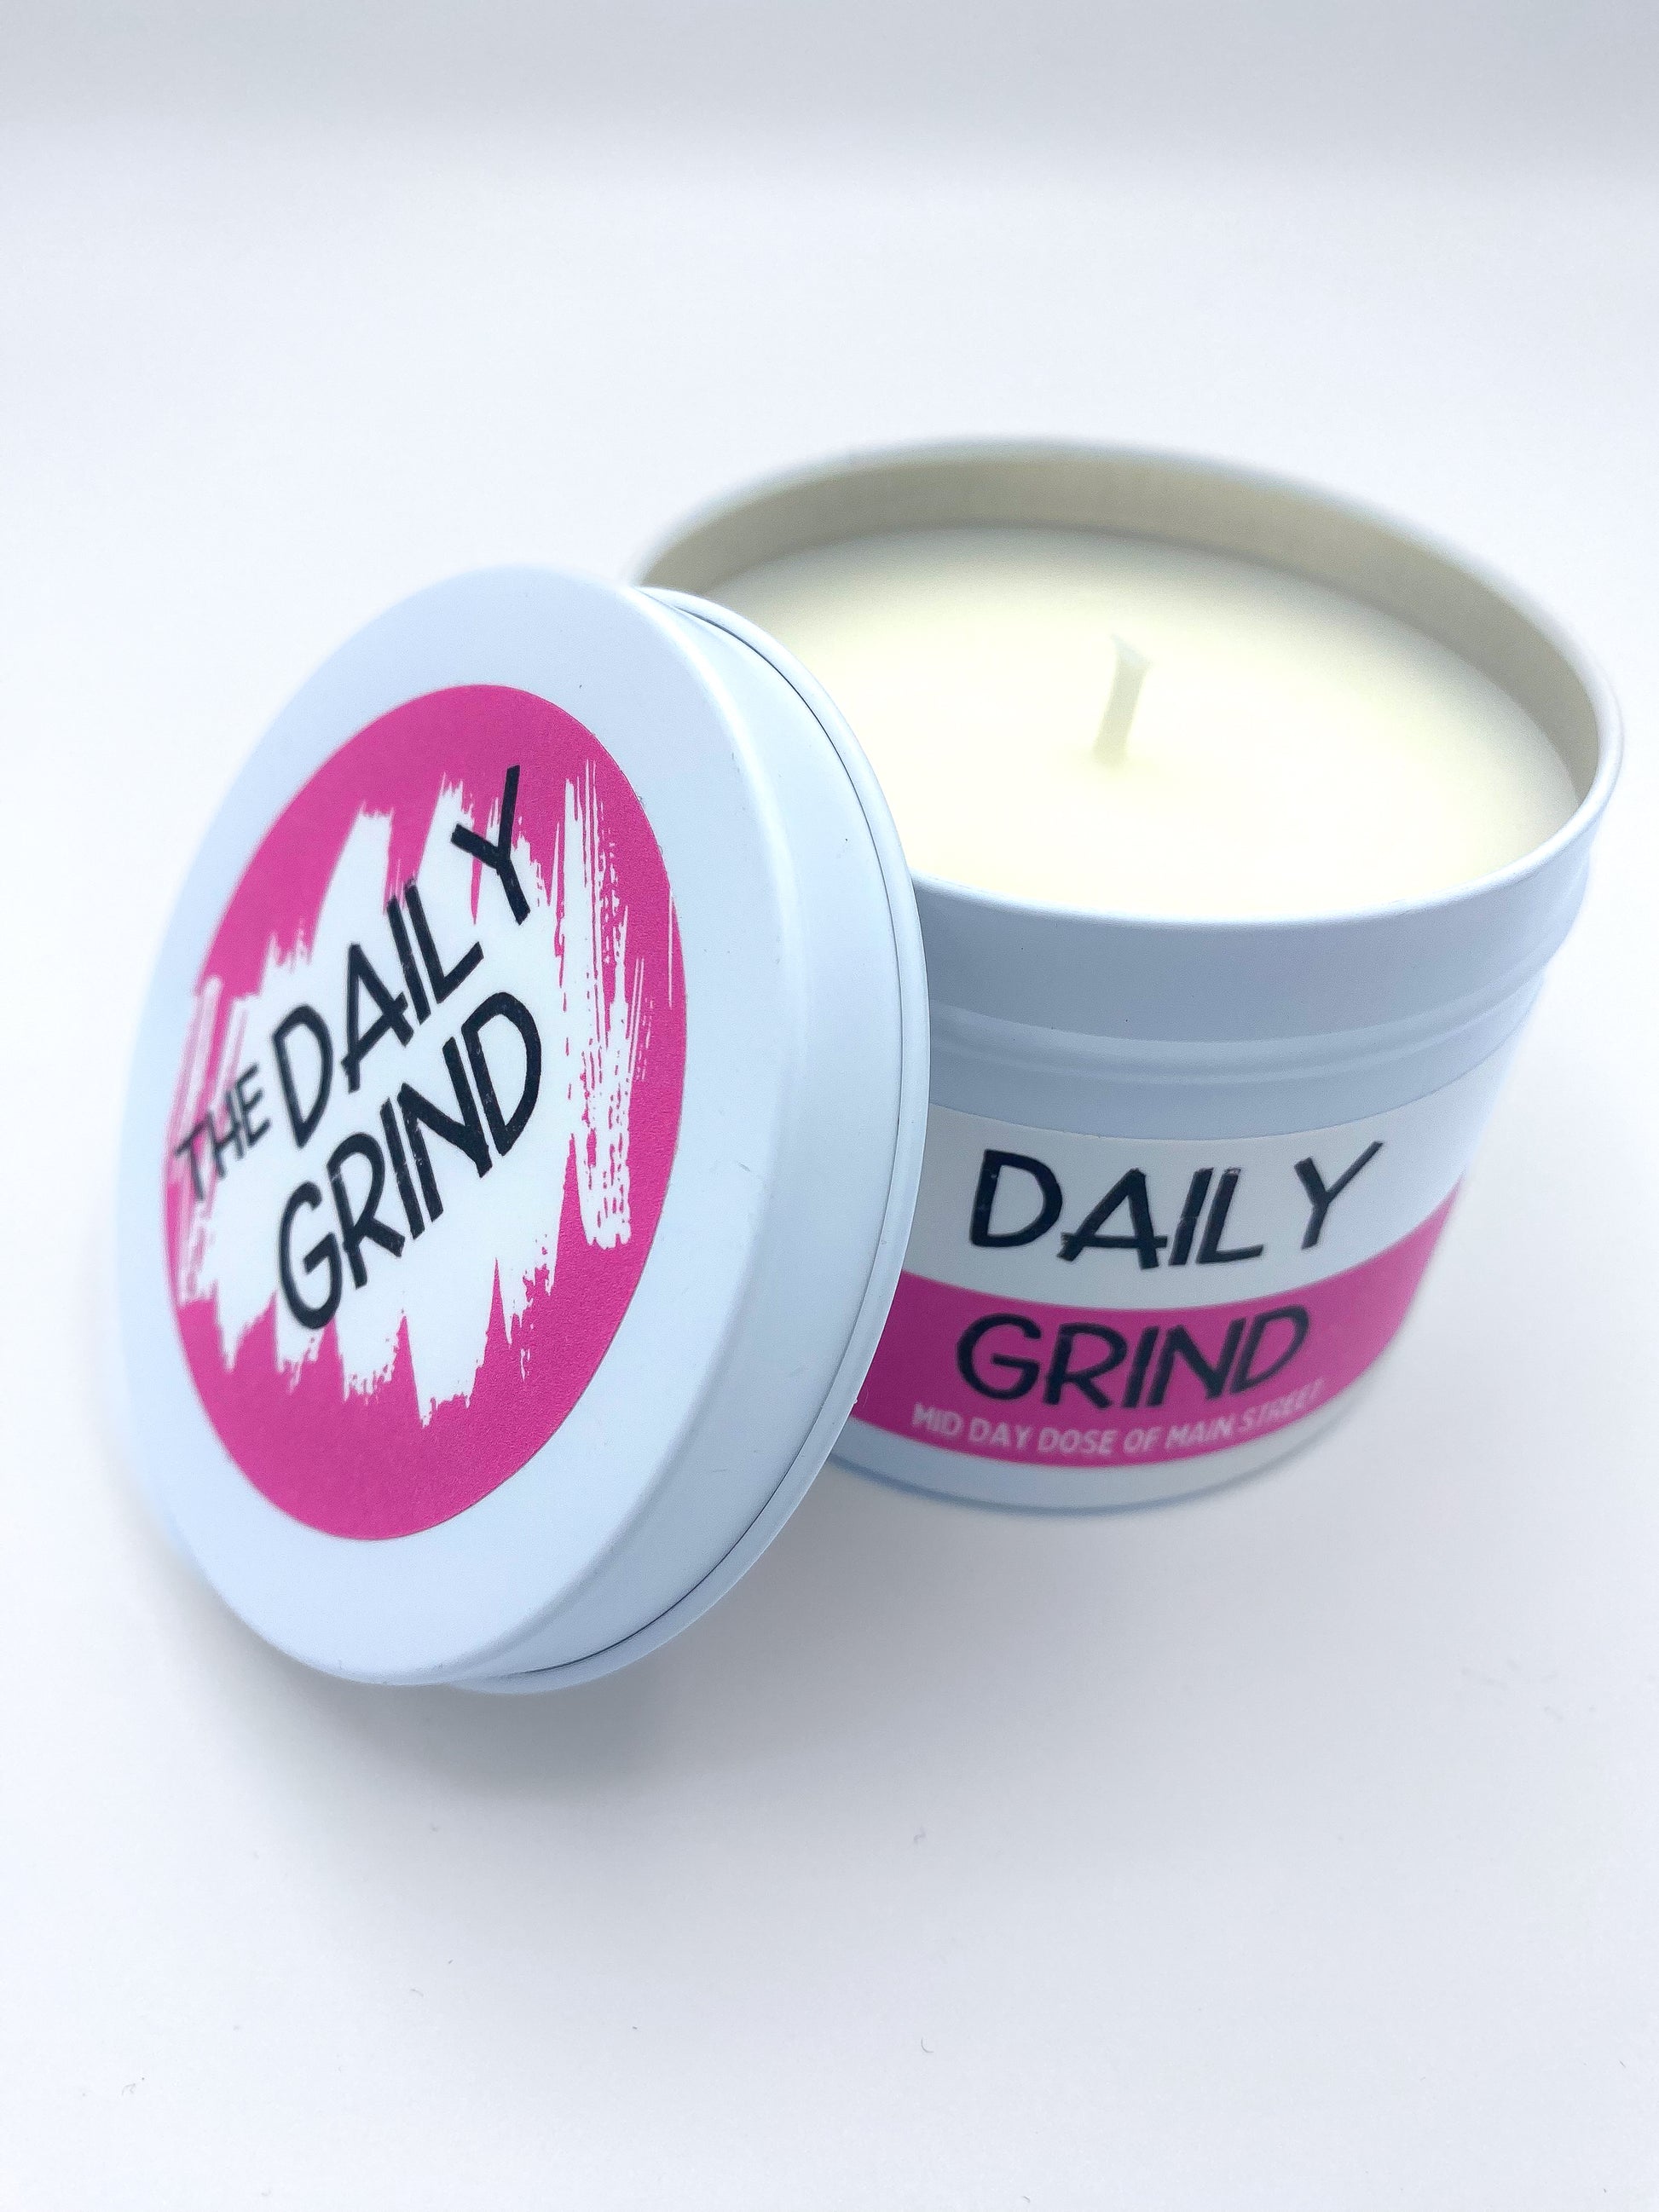 Unlit "Daily Grind" candle in white tin